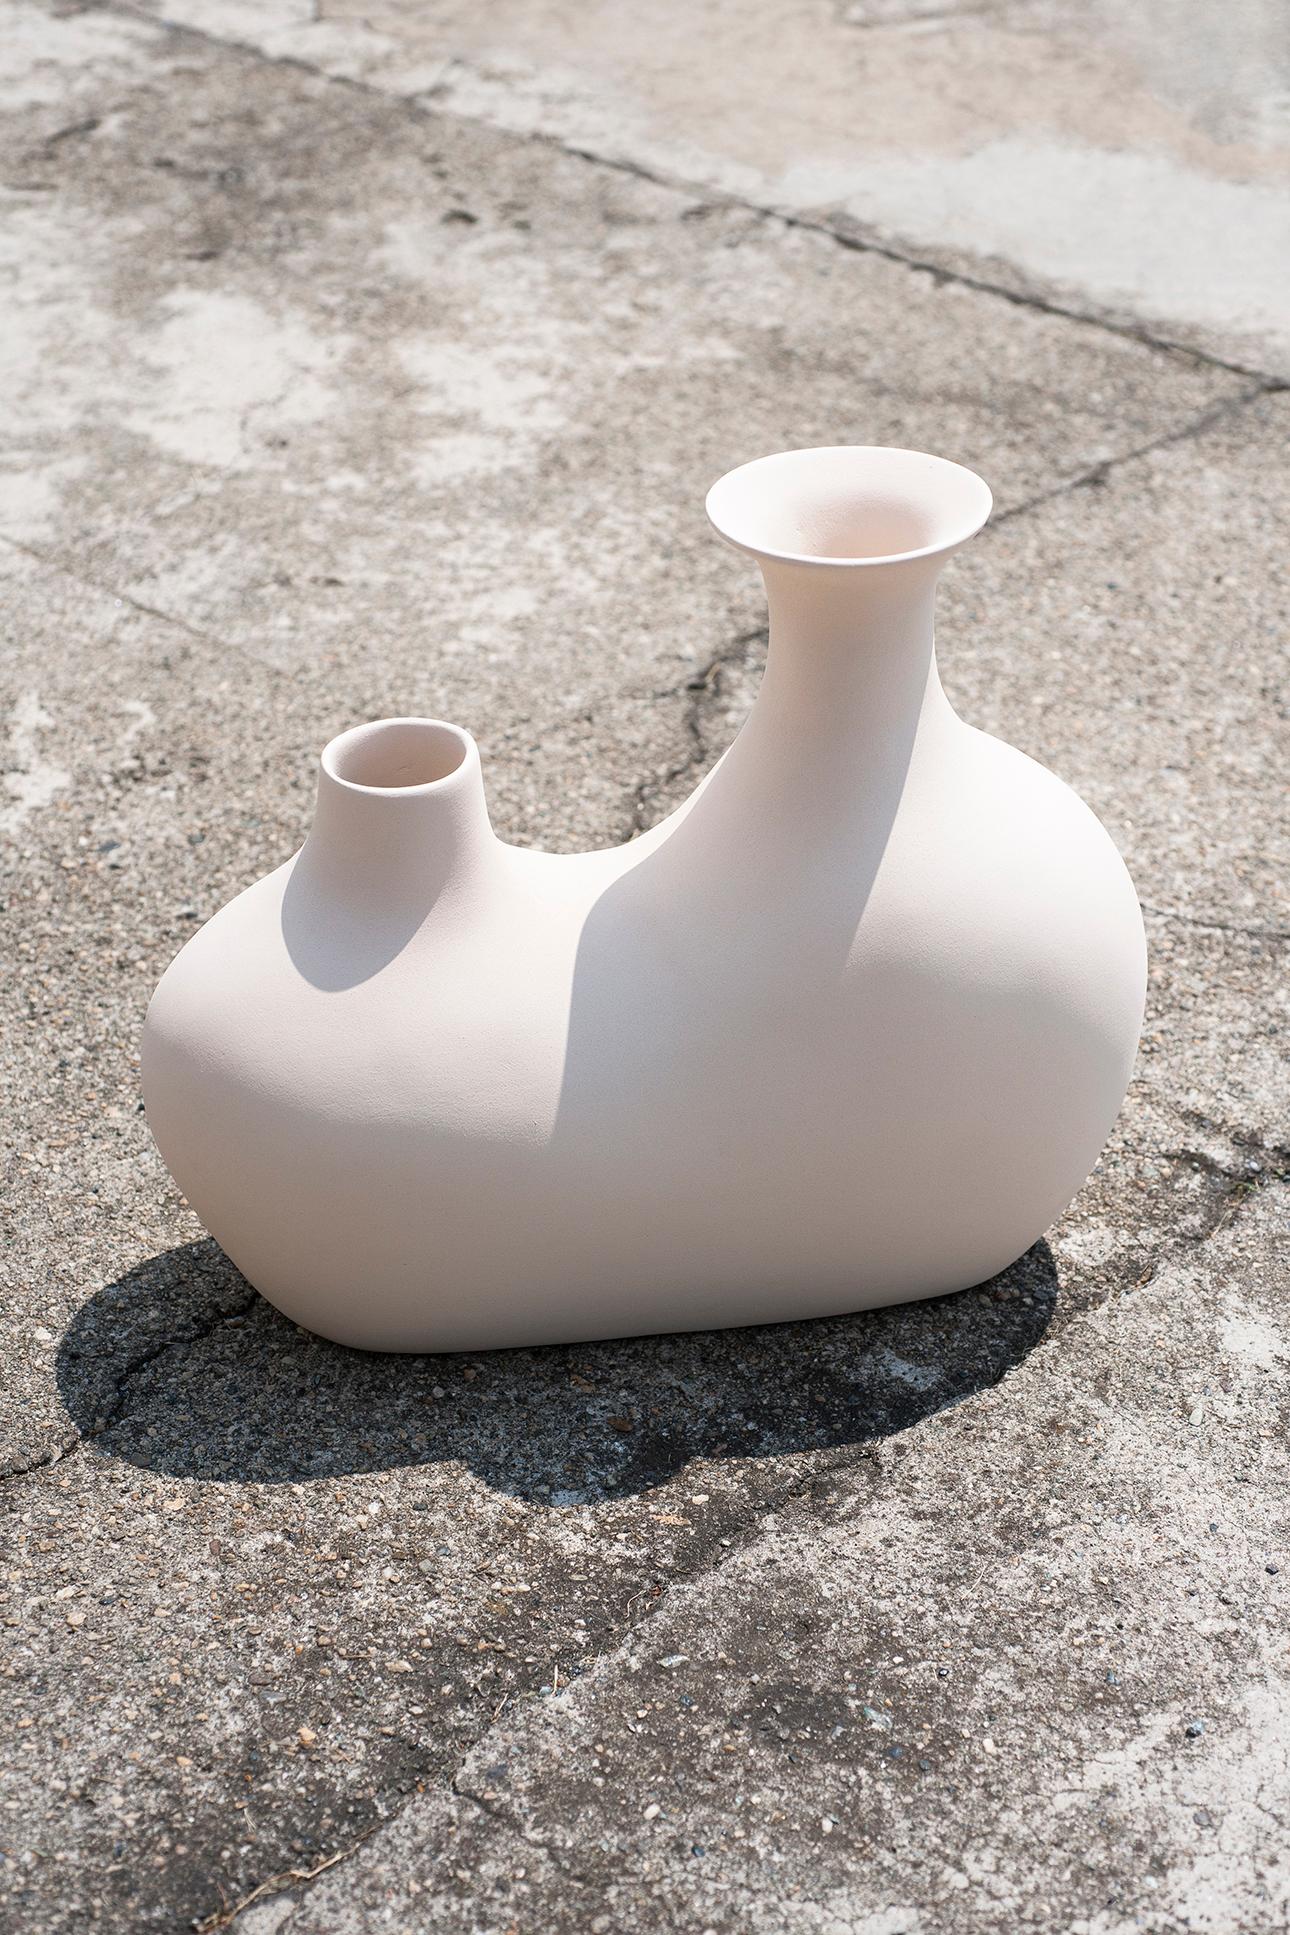 Tacchini Venus ceramic vase in white by Studiopepe. Named Venus in honor of the planet long associated with beauty and harmonious shapes, the vase’s rounded contours celebrate femininity and the anatomical sinuousness of classical